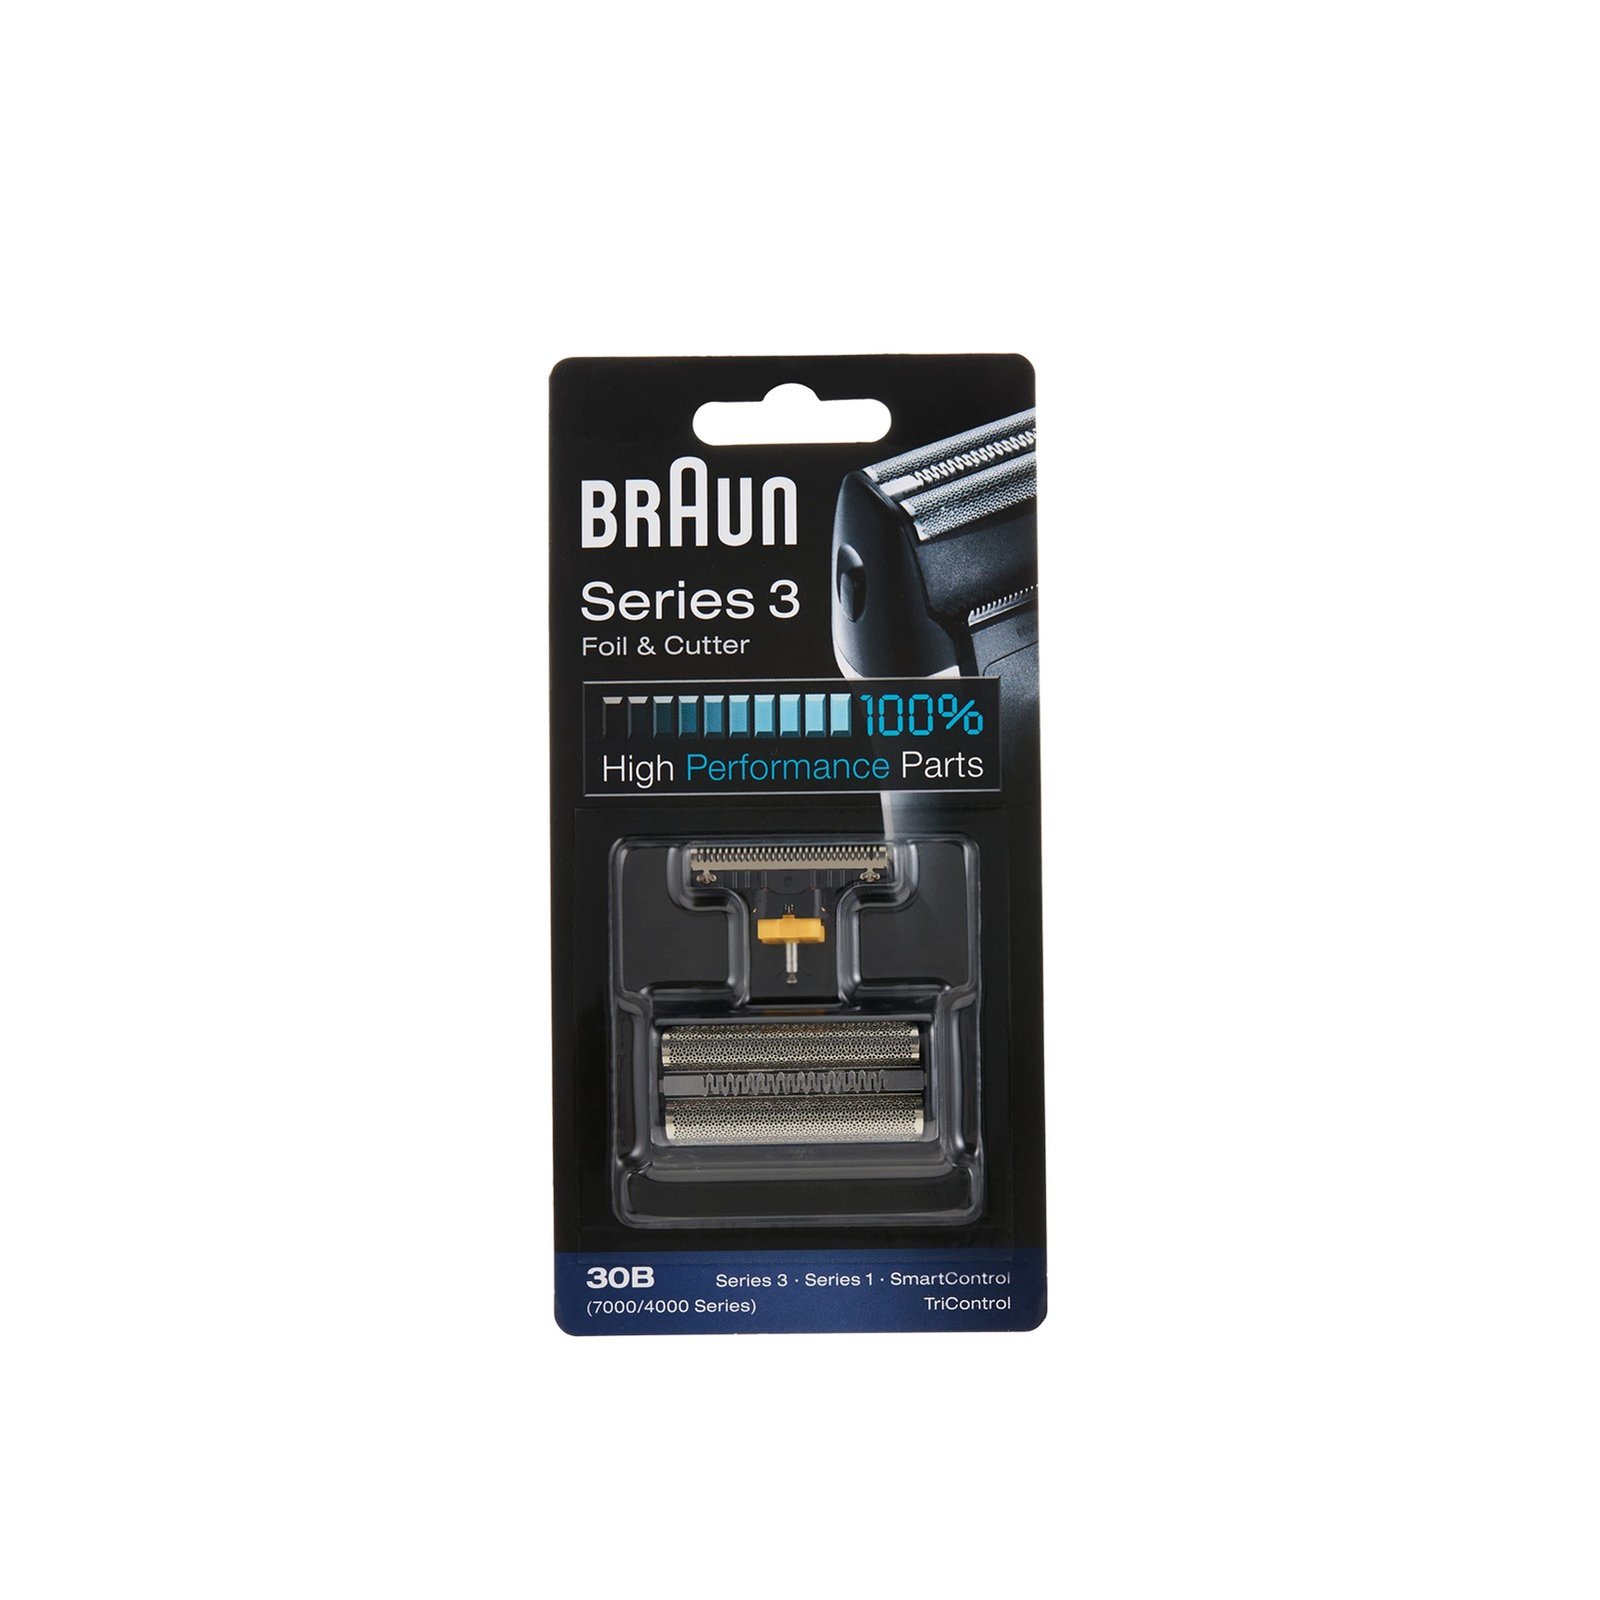 Braun Series 3 Electric Shaver Replacement Head 30B